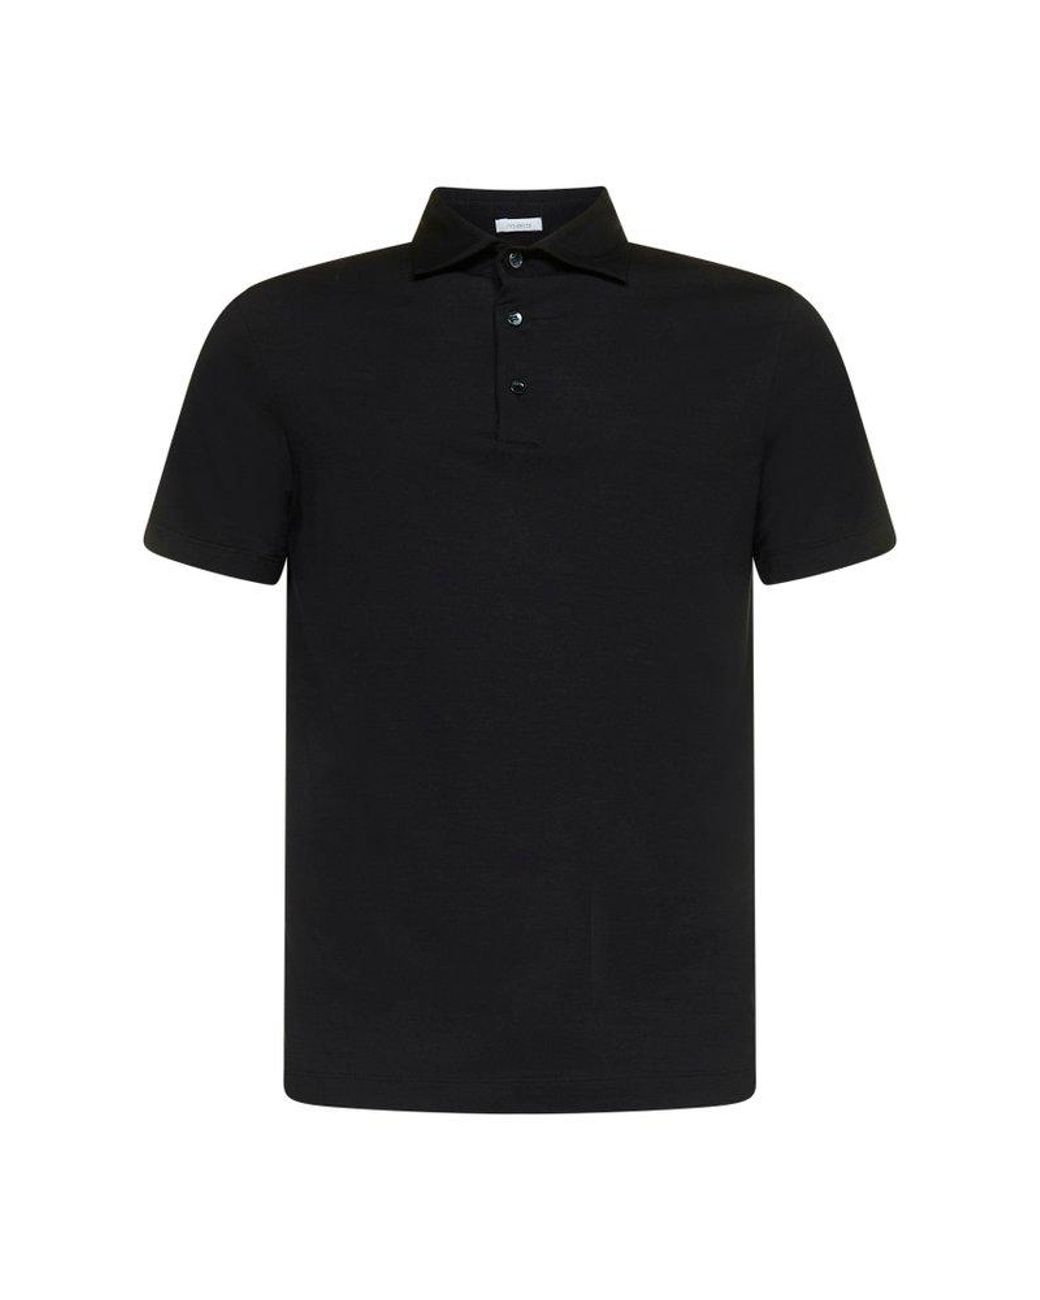 Malo Cotton Straight Hem Classic Polo Shirt in Black for Men | Lyst